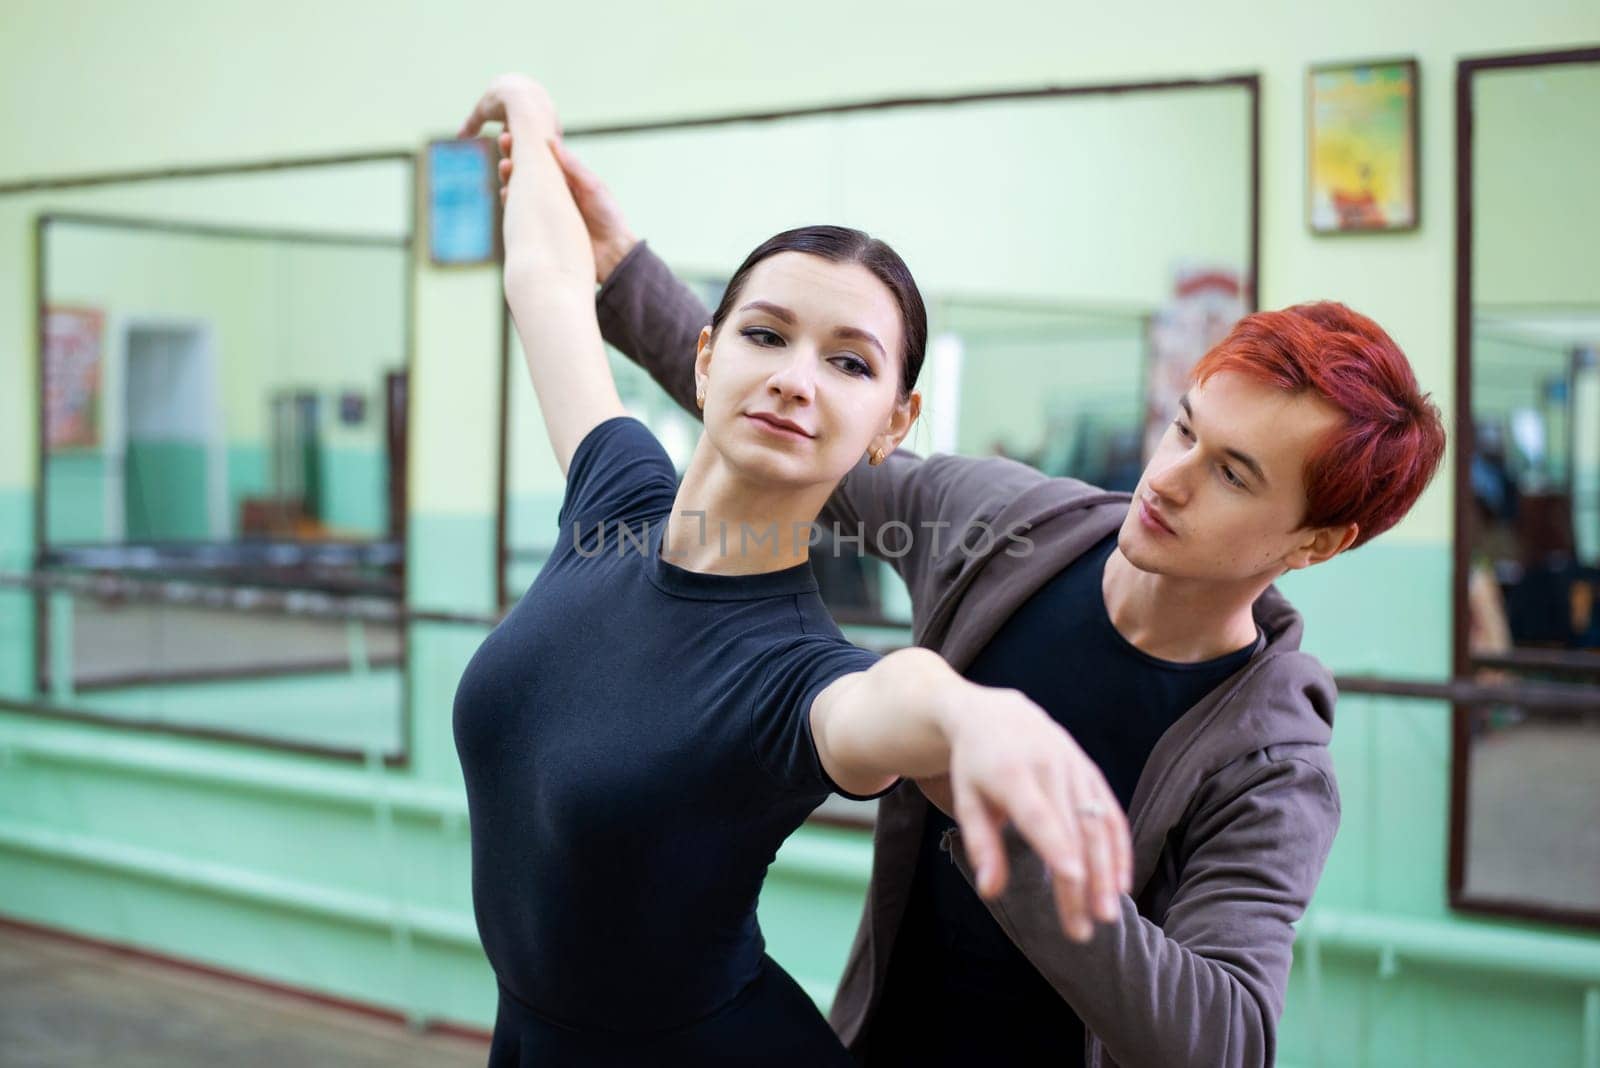 Male dance tutor helps ballerina to learn new moves and perform them correctly